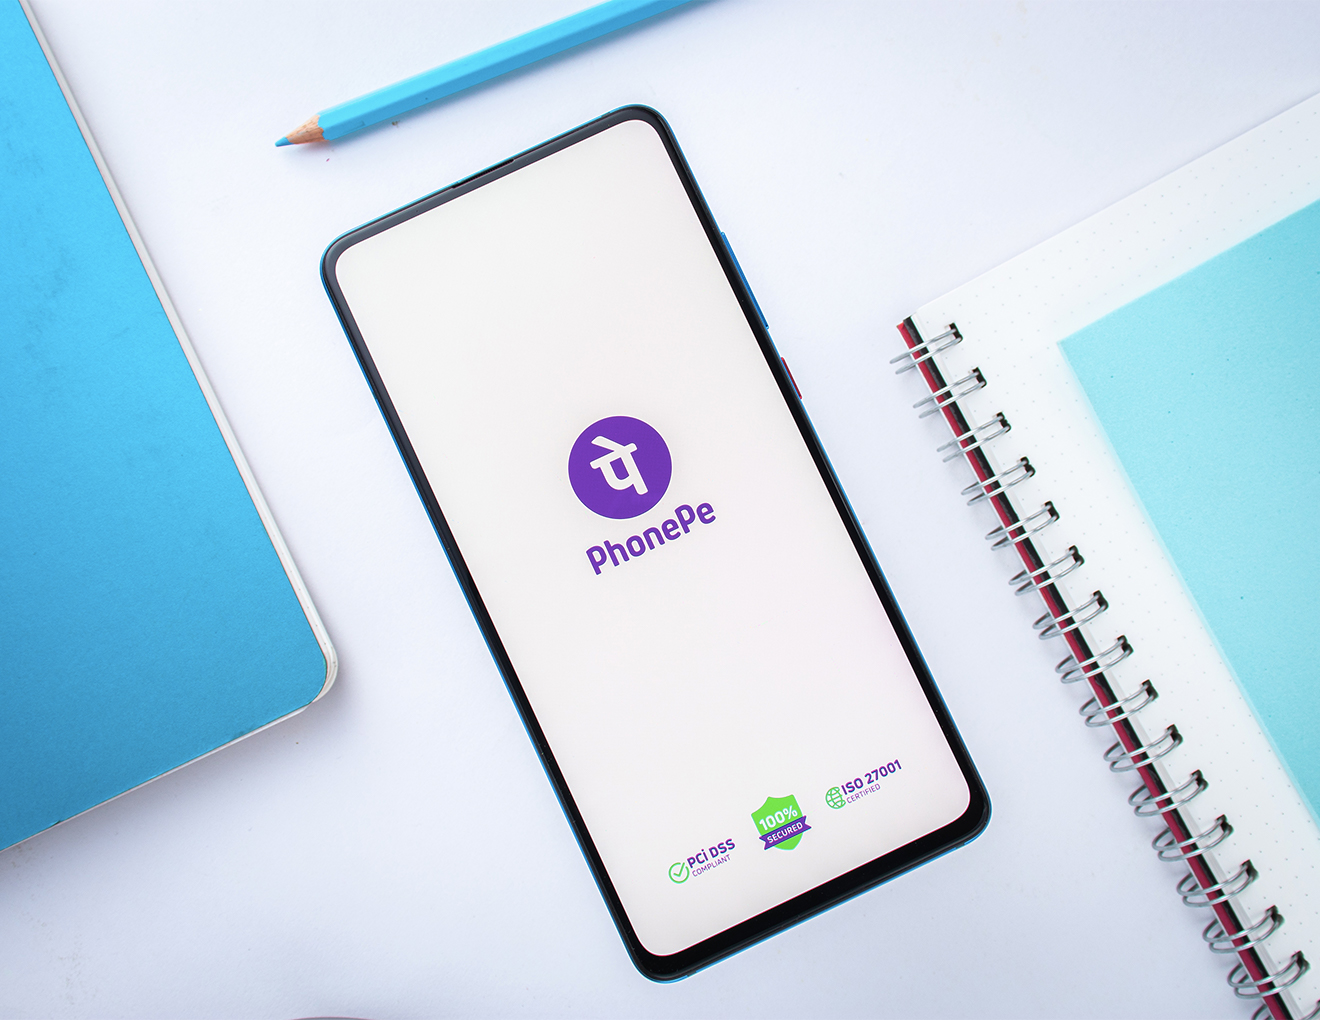 PhonePe Withdraws Trademark Injunction Appeal Against BharatPe Over ‘Pe’ Suffix